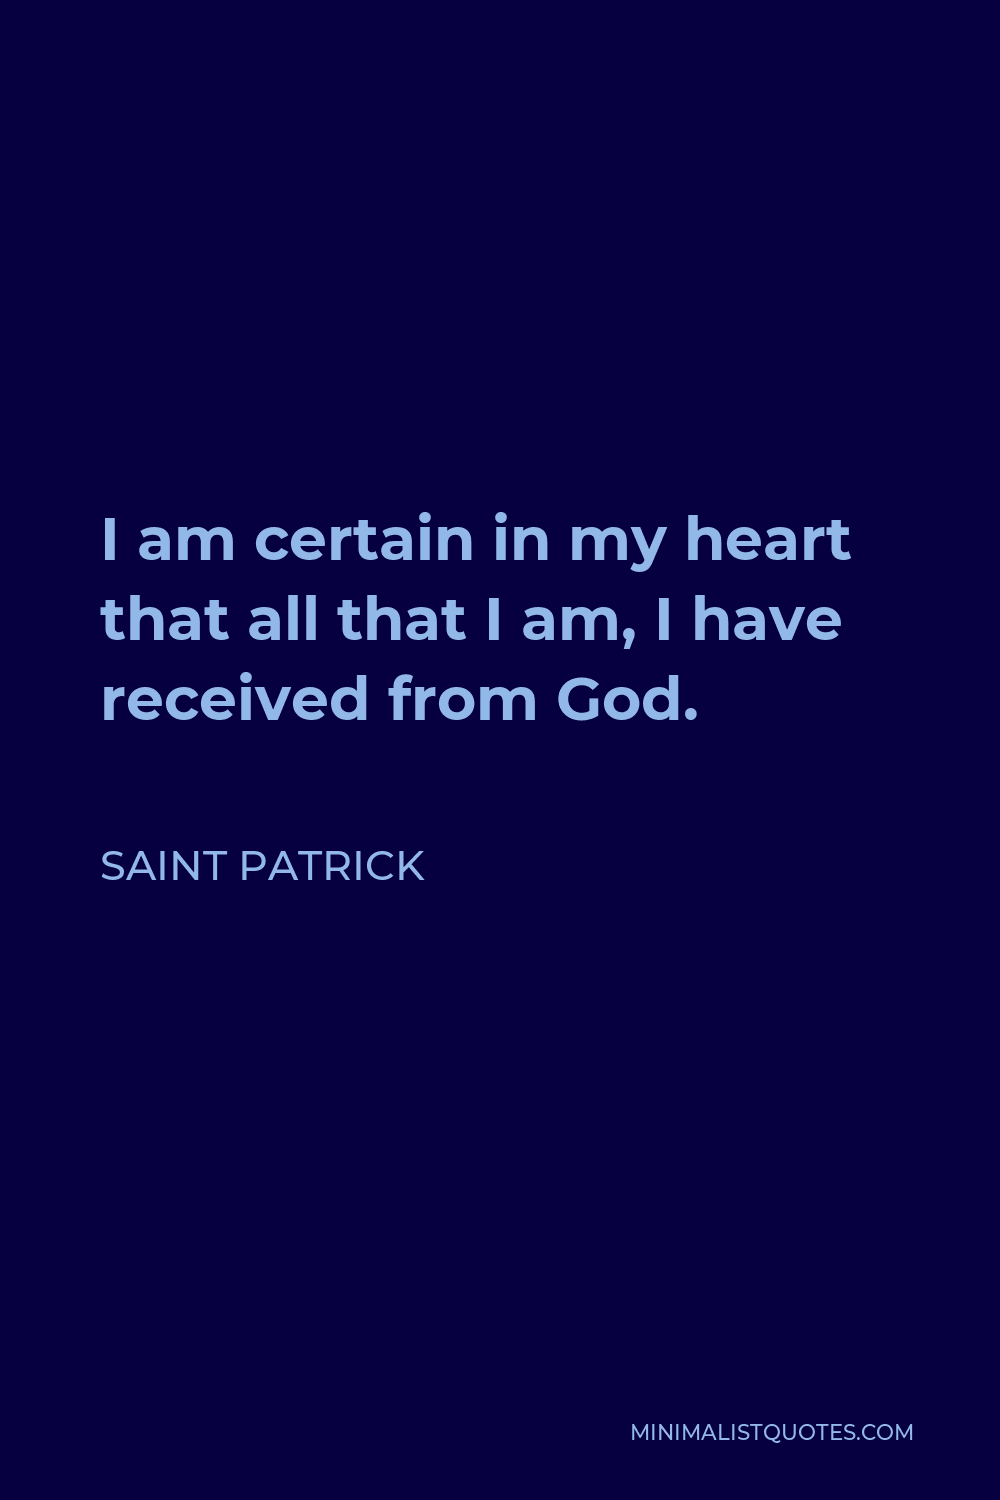 Saint Patrick Quote - I am certain in my heart that all that I am, I have received from God.